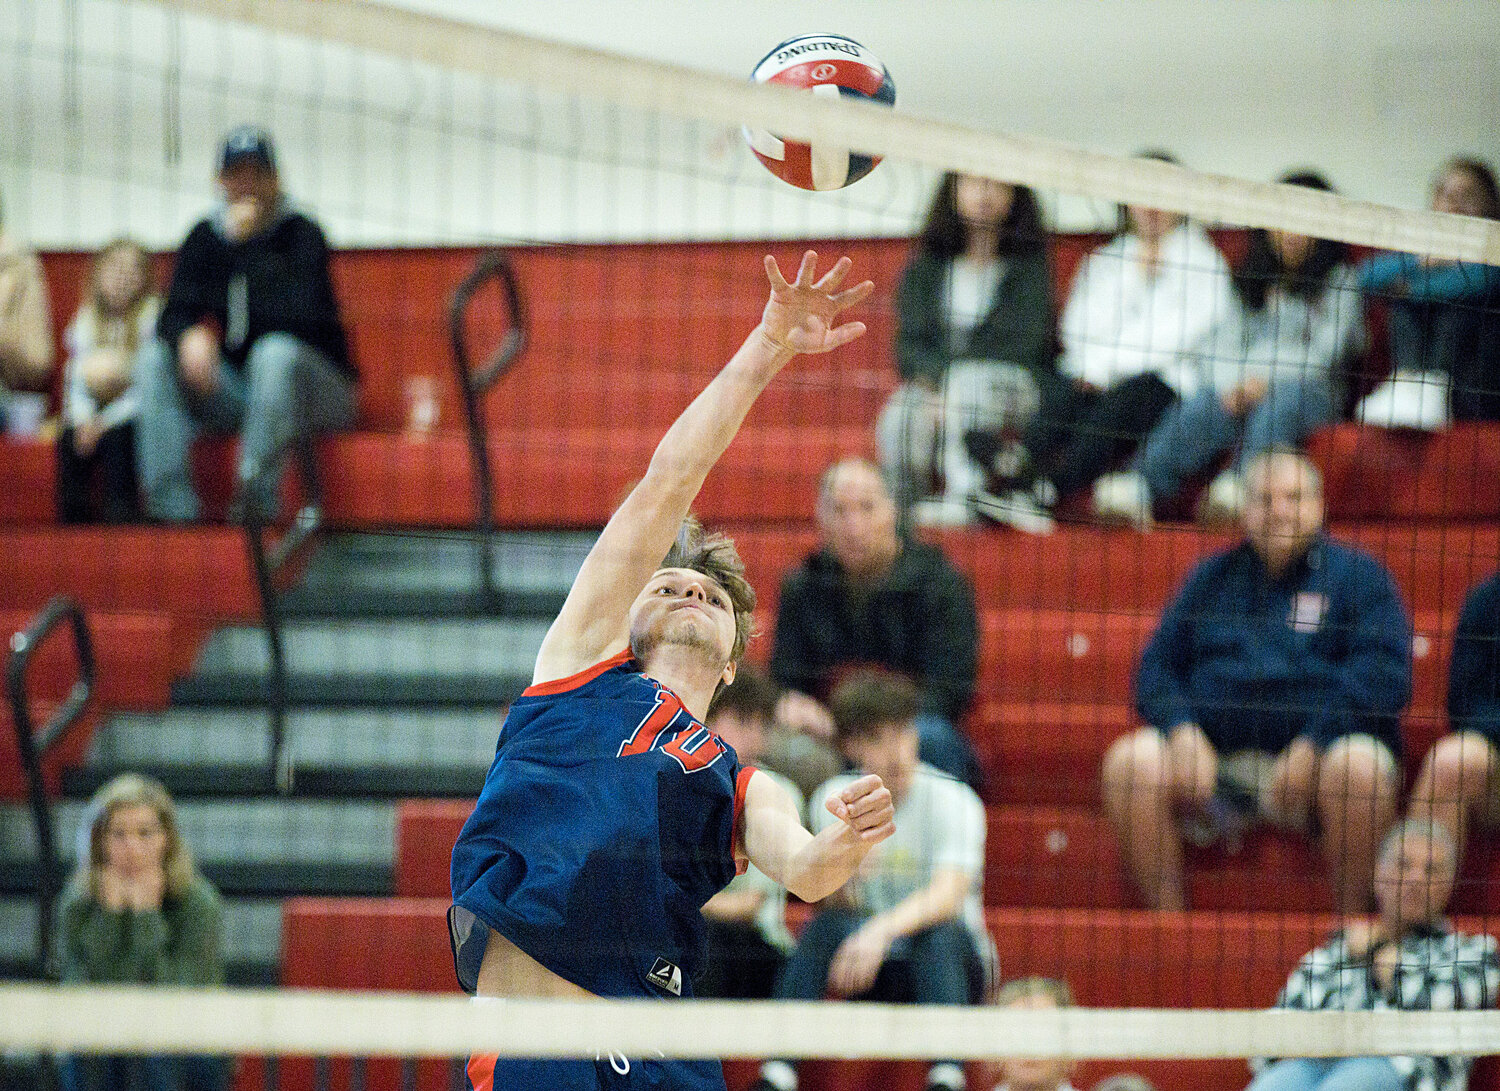 Hayden Krzych fires the ball over the net while rallying with St. Ray’s.